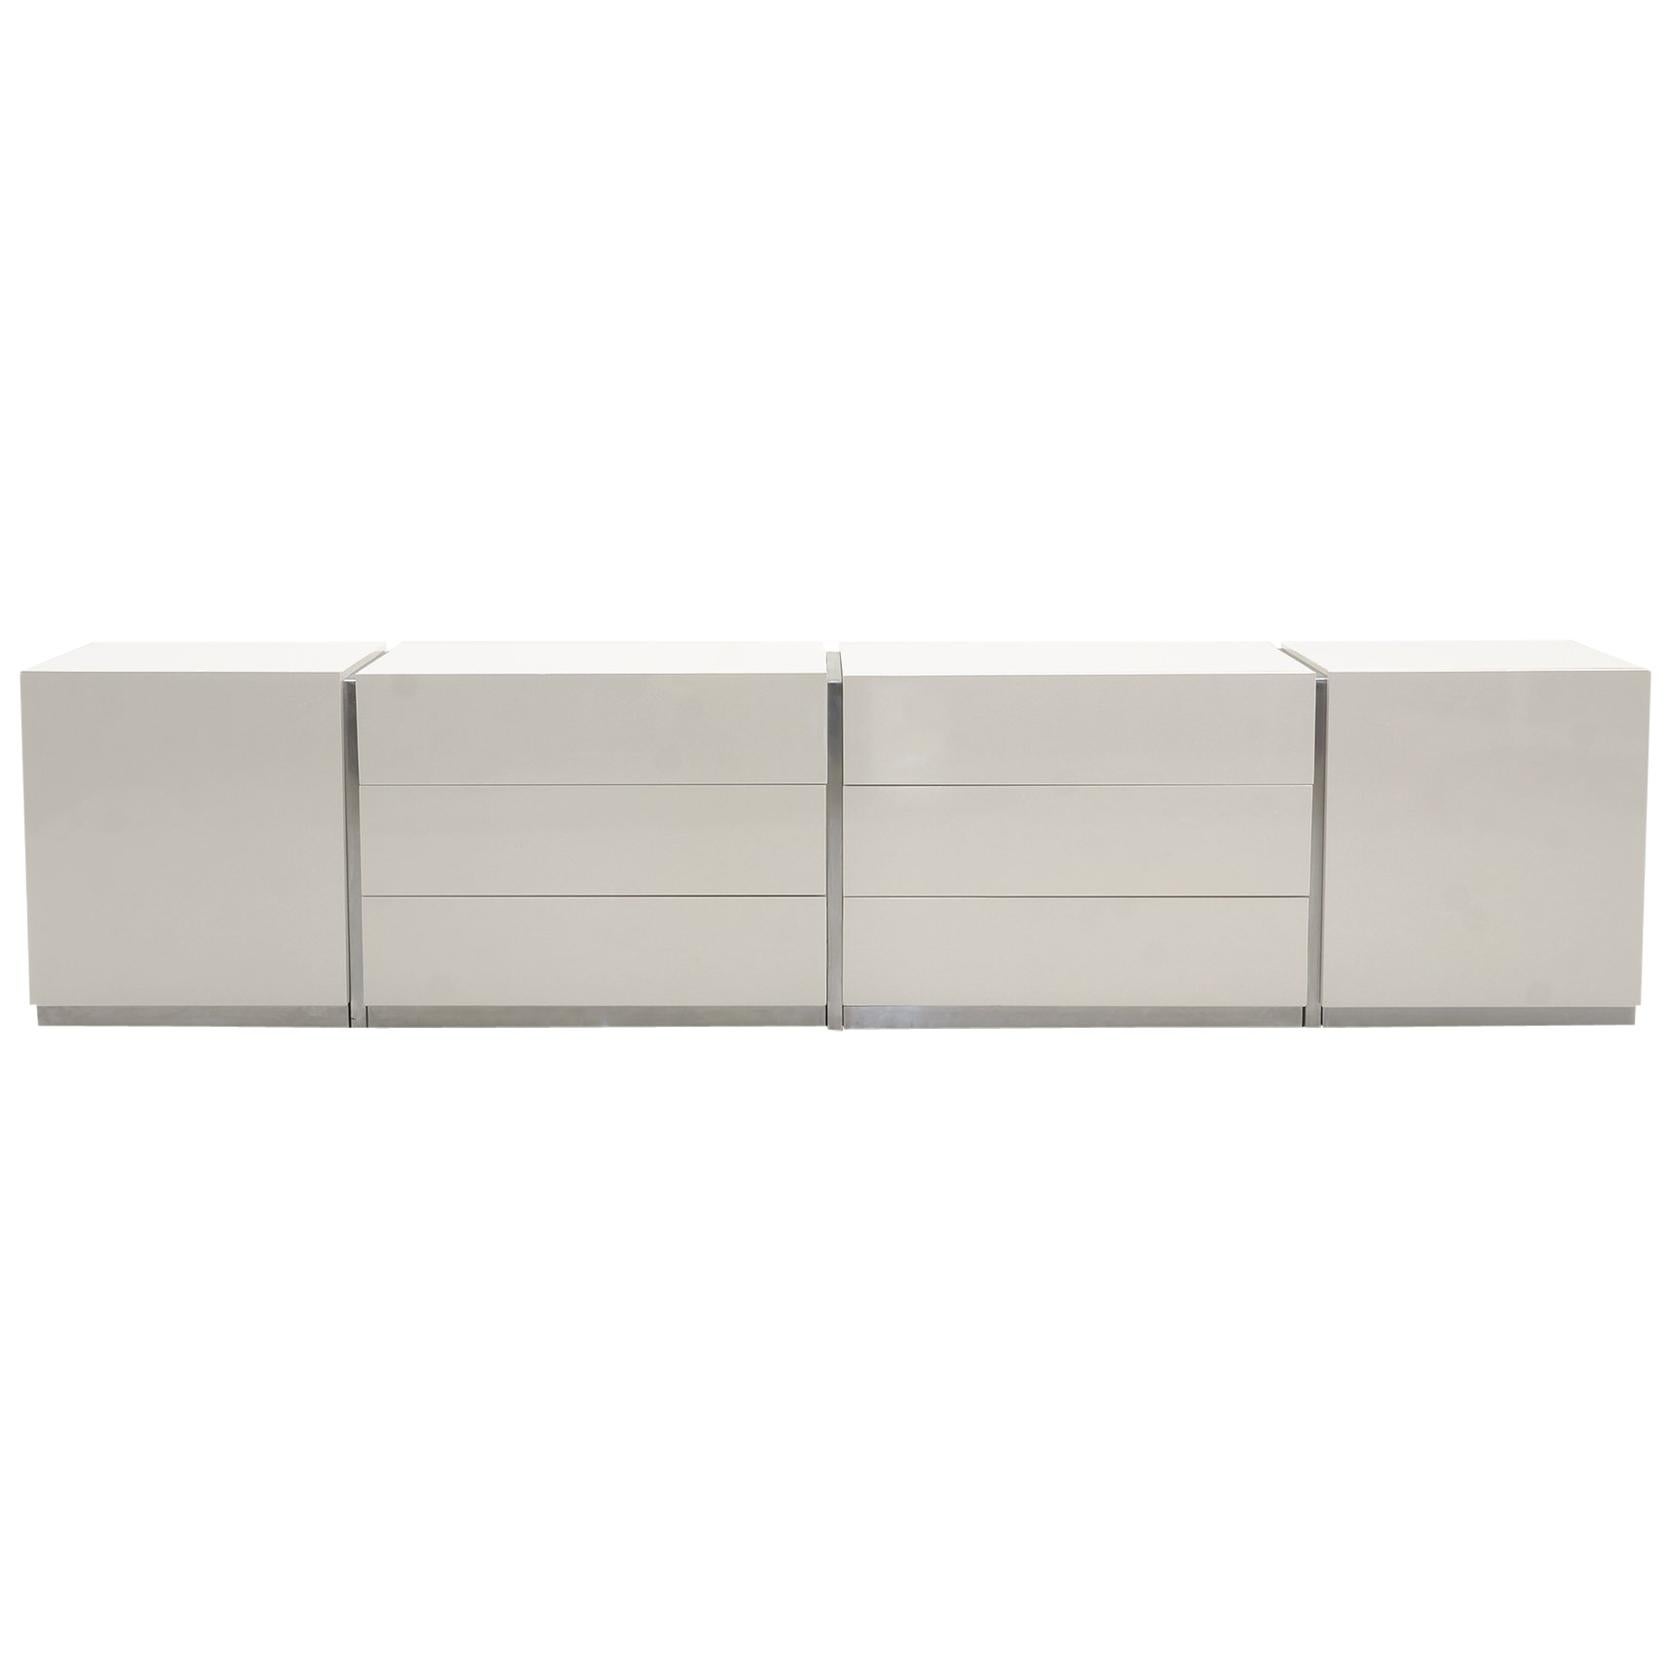 Modular Storage Cabinets with Drawers & Shelves by Milo Baughman, White / Ivory 